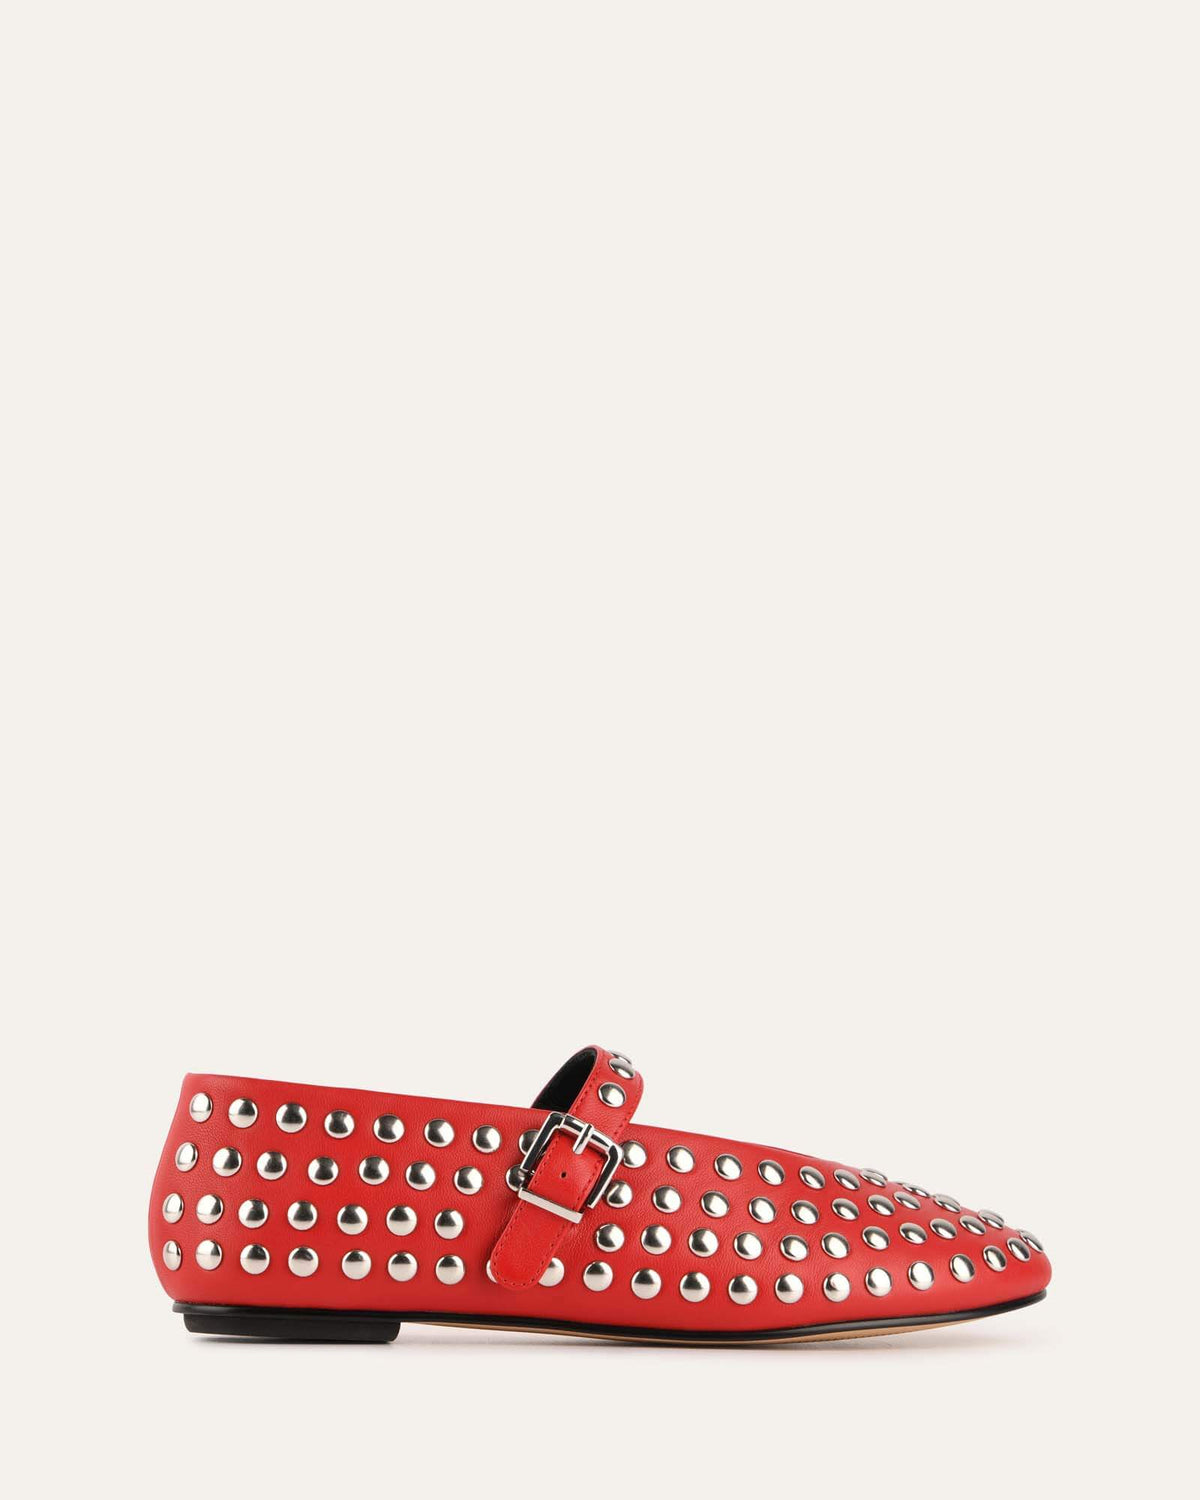 GIGI CASUAL FLATS RED LEATHER